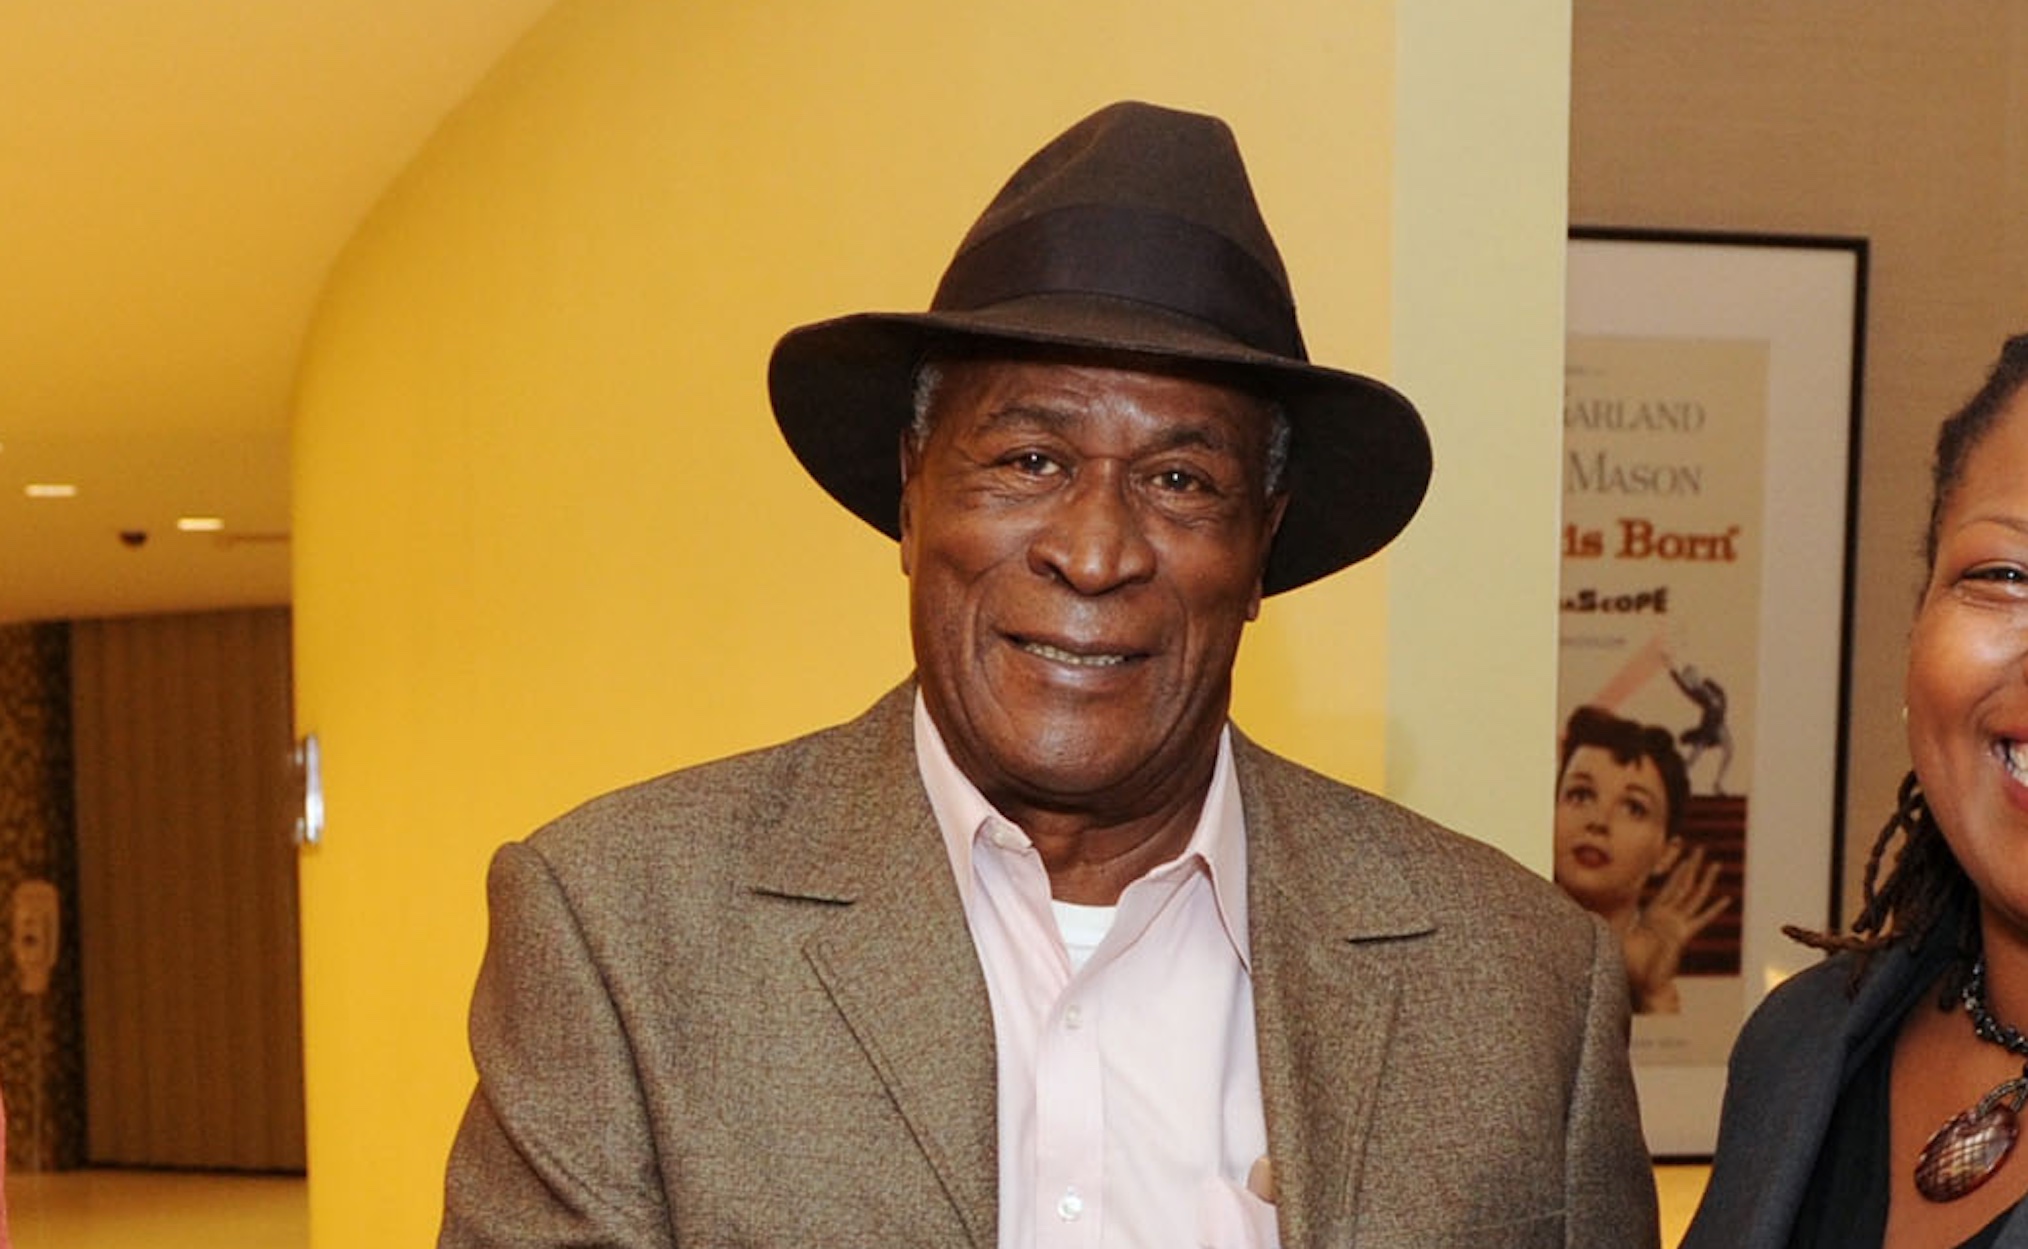 john amos’ daughter shannon takes down gofundme after being accused of elder abuse